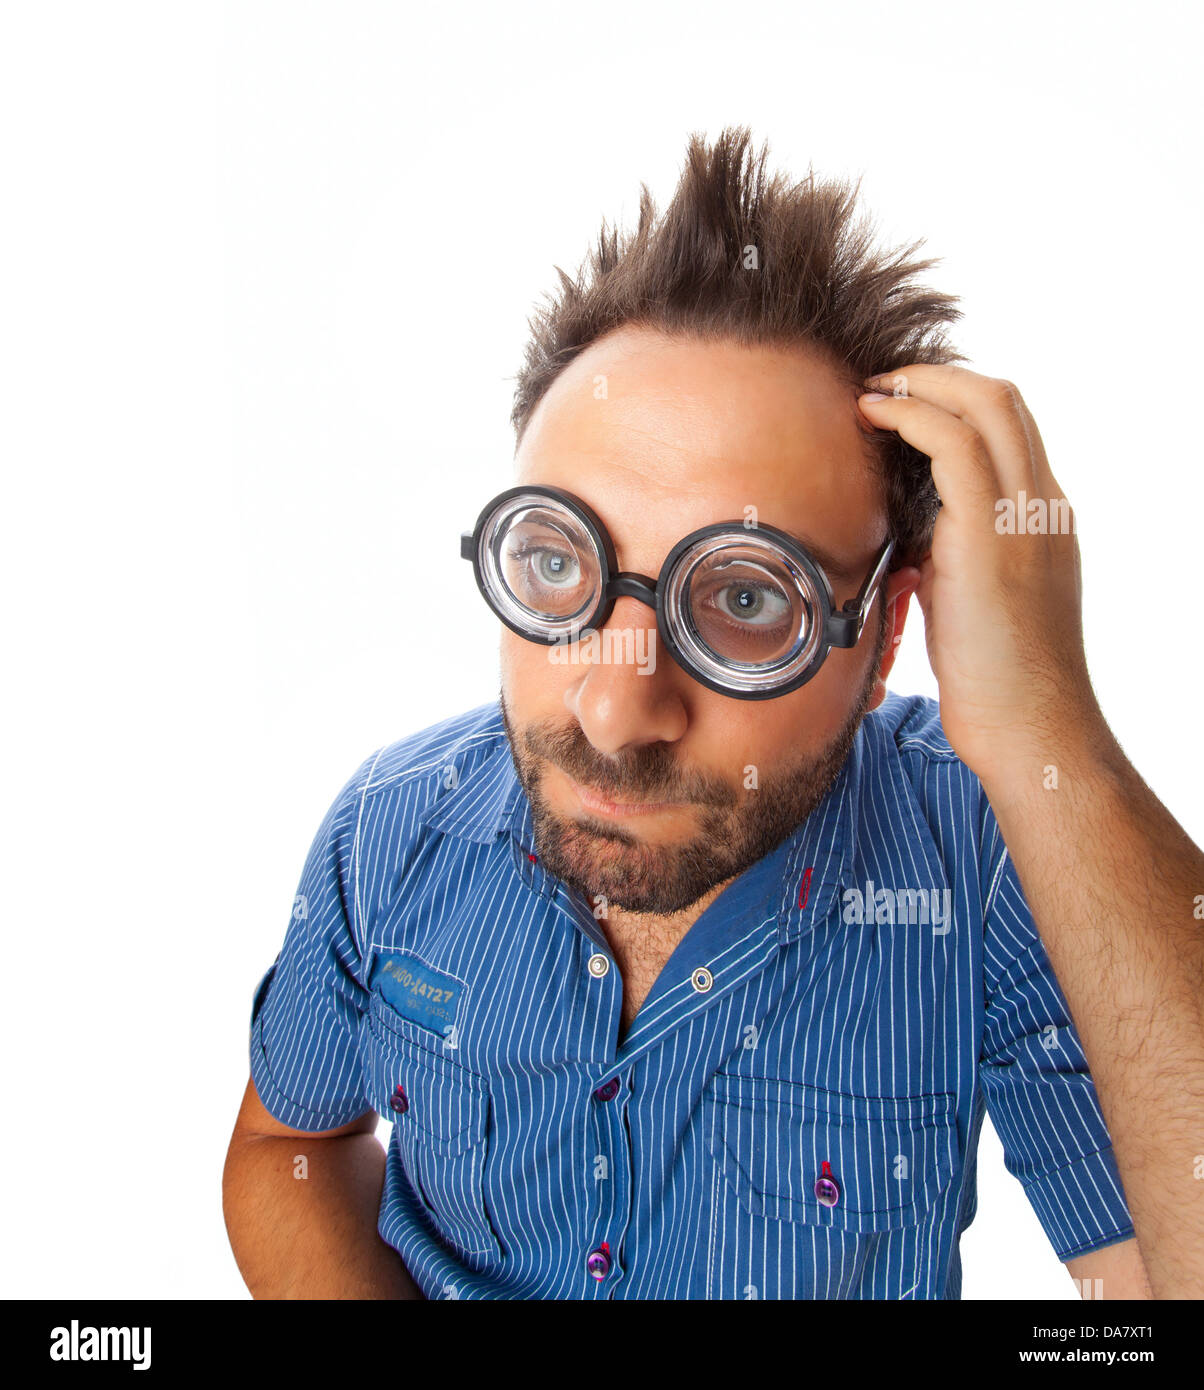 Young boy with a surprised expression with eye glasses Stock Photo